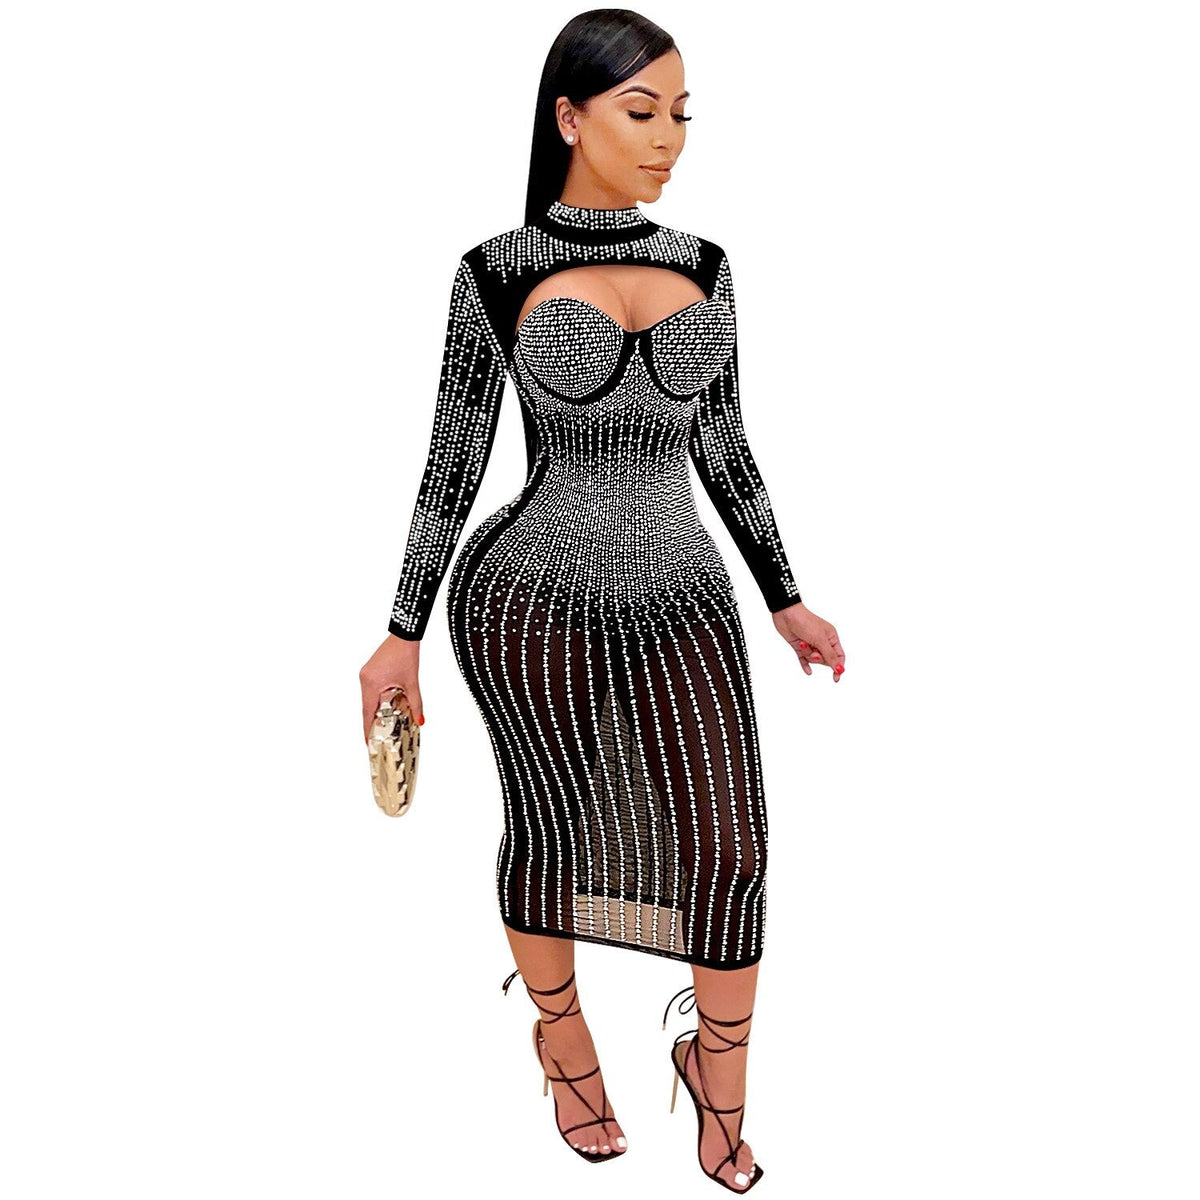 ANJAMANOR Rhinestone Mesh Sheer Sexy Evening Dresses   Bling Gown Party Club Wear Long Sleeve Bodycon Dress D42HD47